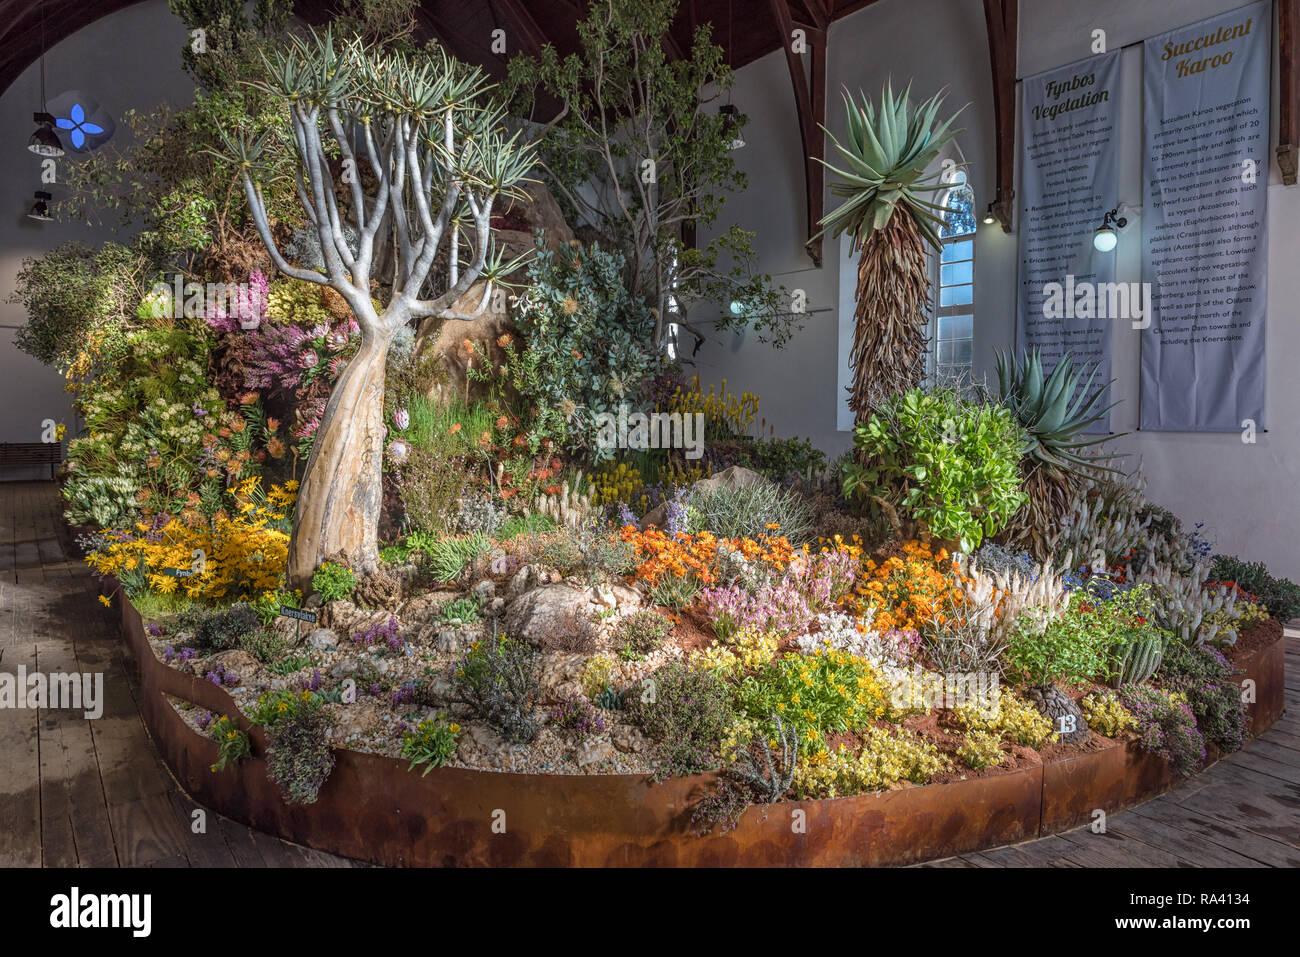 CLANWILLIAM, SOUTH AFRICA, AUGUST 28, 2018: The yearly wild flower show inside the historic first Dutch Reformed Church in Clanwilliam in the Western  Stock Photo